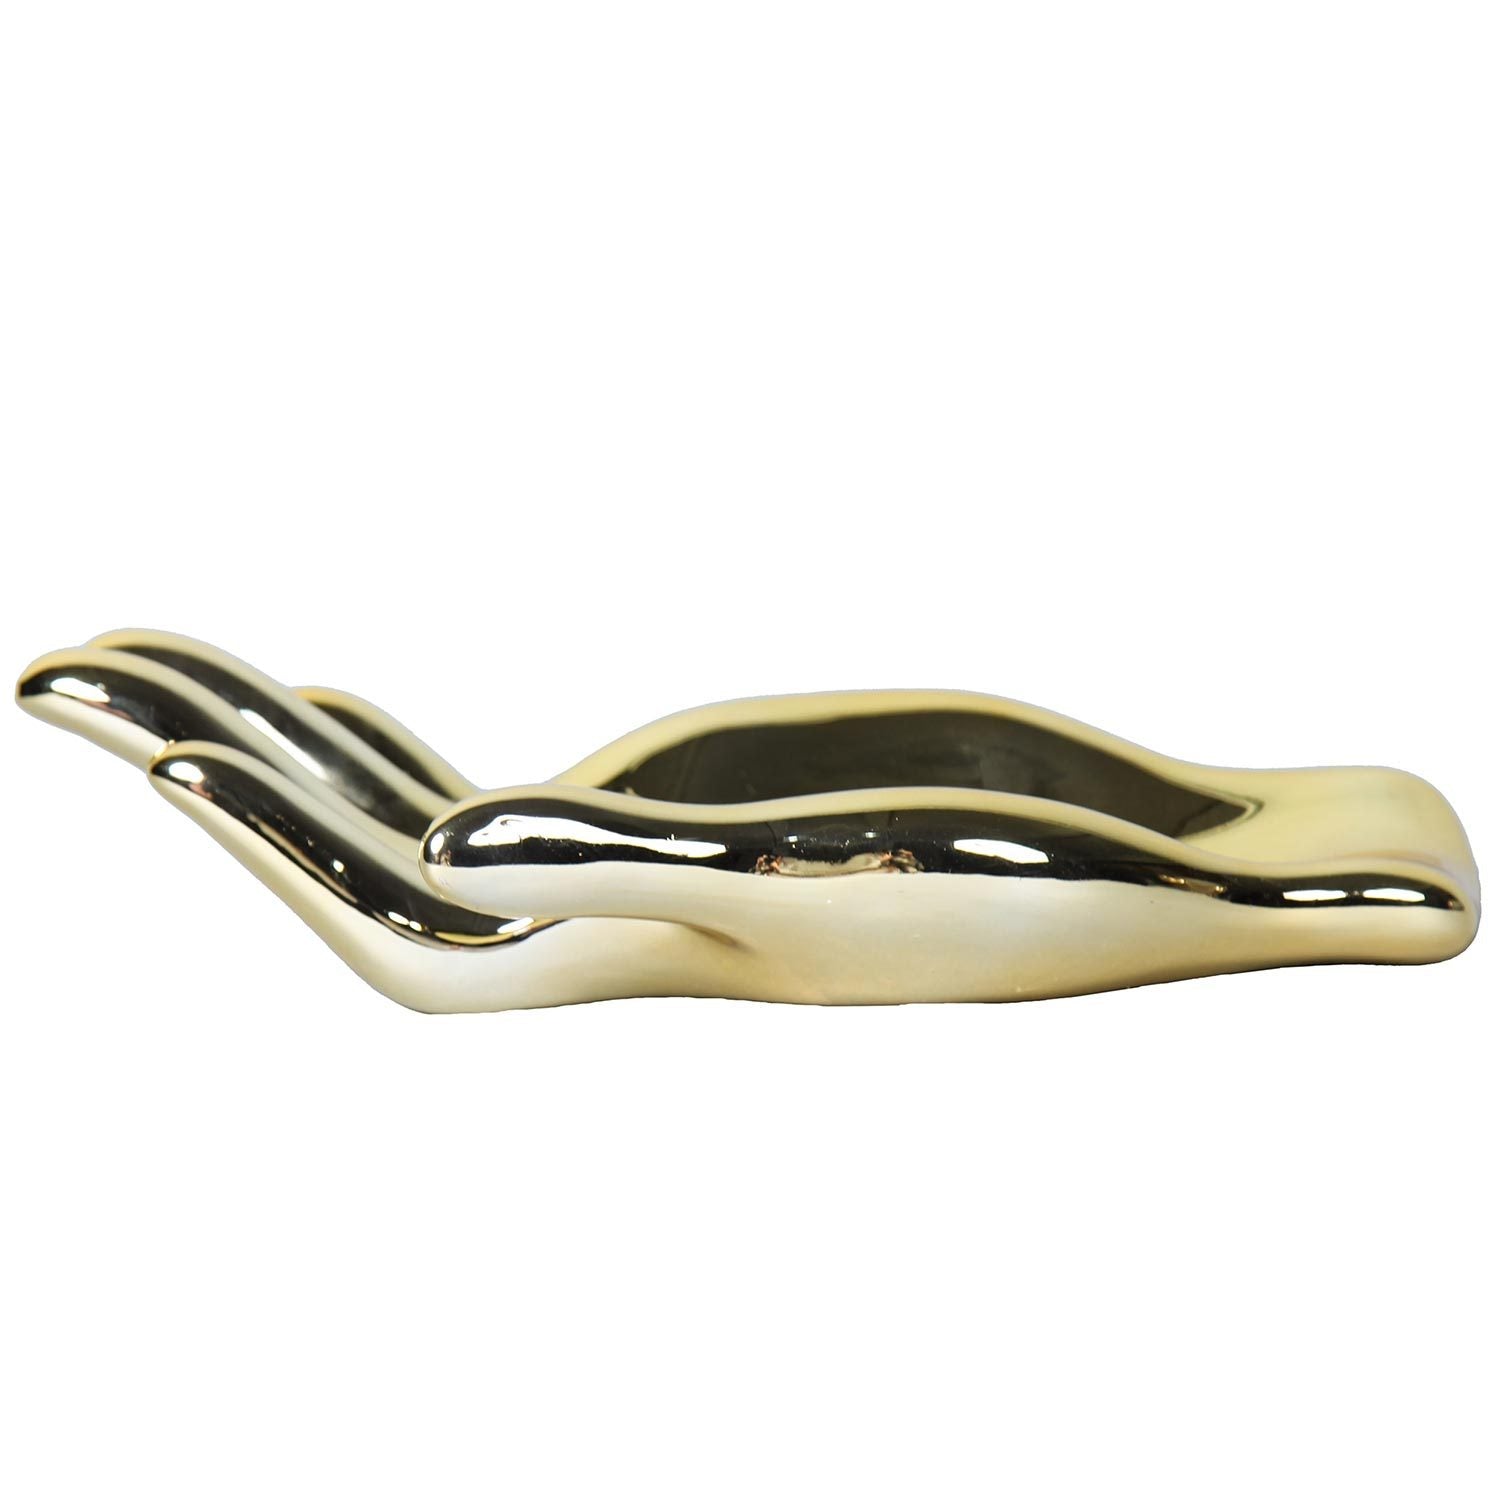 Ceramic Hand Sculpture in Gold Functional and